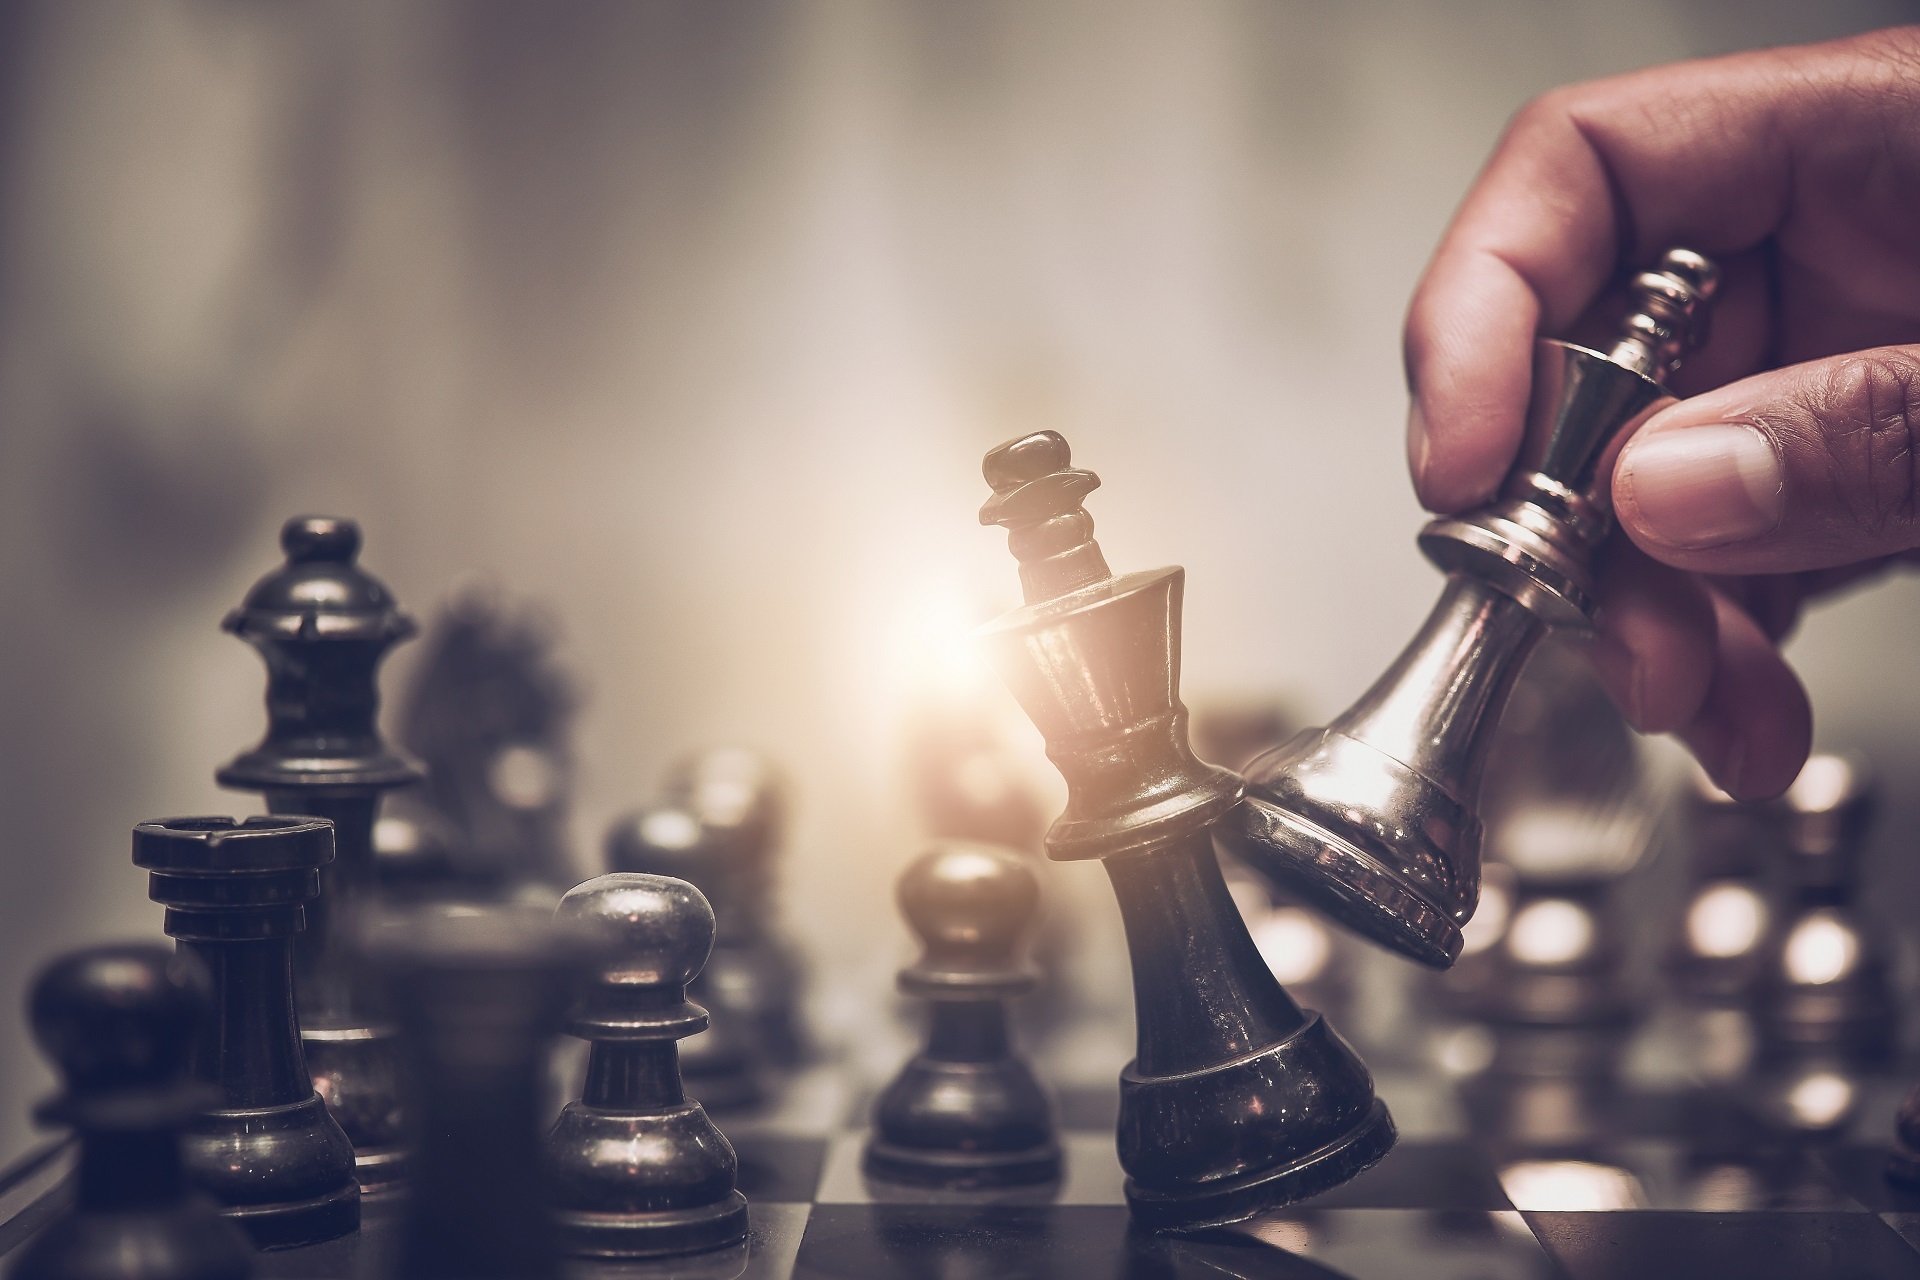 Check out the best sites to play online chess games